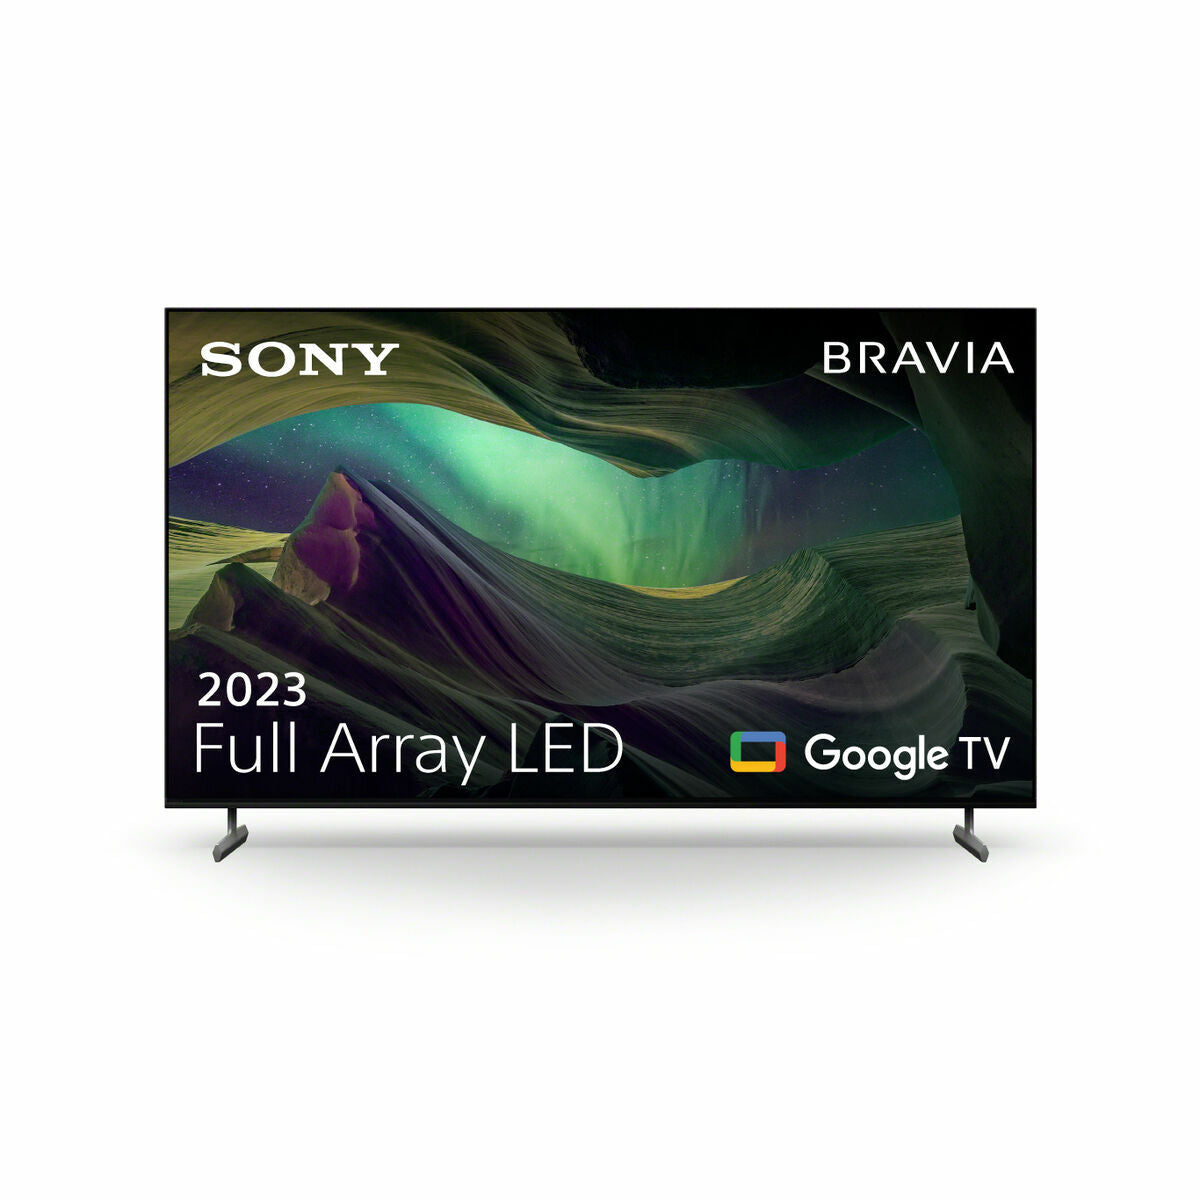 Smart TV Sony KD-55X85L LED 55" 4K Ultra HD, Sony, Electronics, TV, Video and home cinema, smart-tv-sony-kd-55x85l-led-55-4k-ultra-hd, :55 INCHES or 139.7 CM, :85 INCHES or 215.9 CM, :Direct LED, :Ultra HD, Brand_Sony, category-reference-2609, category-reference-2625, category-reference-2931, category-reference-t-18805, category-reference-t-19653, cinema and television, Condition_NEW, entertainment, Price_+ 1000, RiotNook